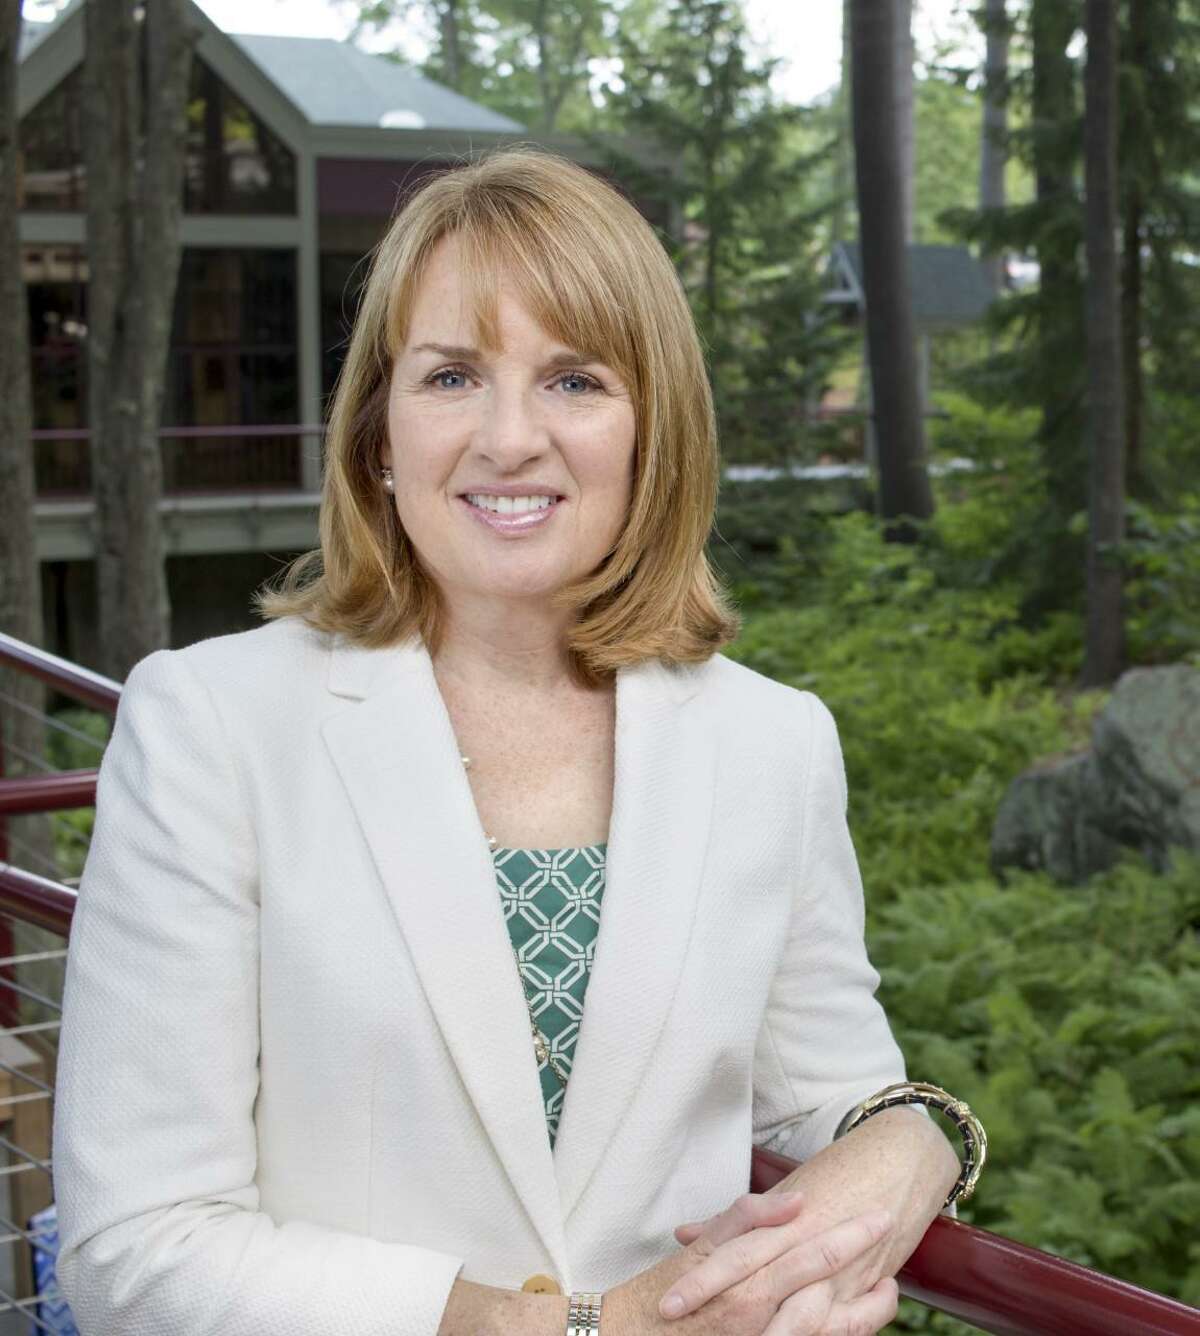 The staff at the St. Luke’s School in New Canaan, recently announced the appointment of its ninth Head of School: Mary Halpin Carter, Ph.D., effective July 1, 2022. St. Luke’s began a national search after longstanding Head of School, Mark Davis, announced retirement plans last fall.